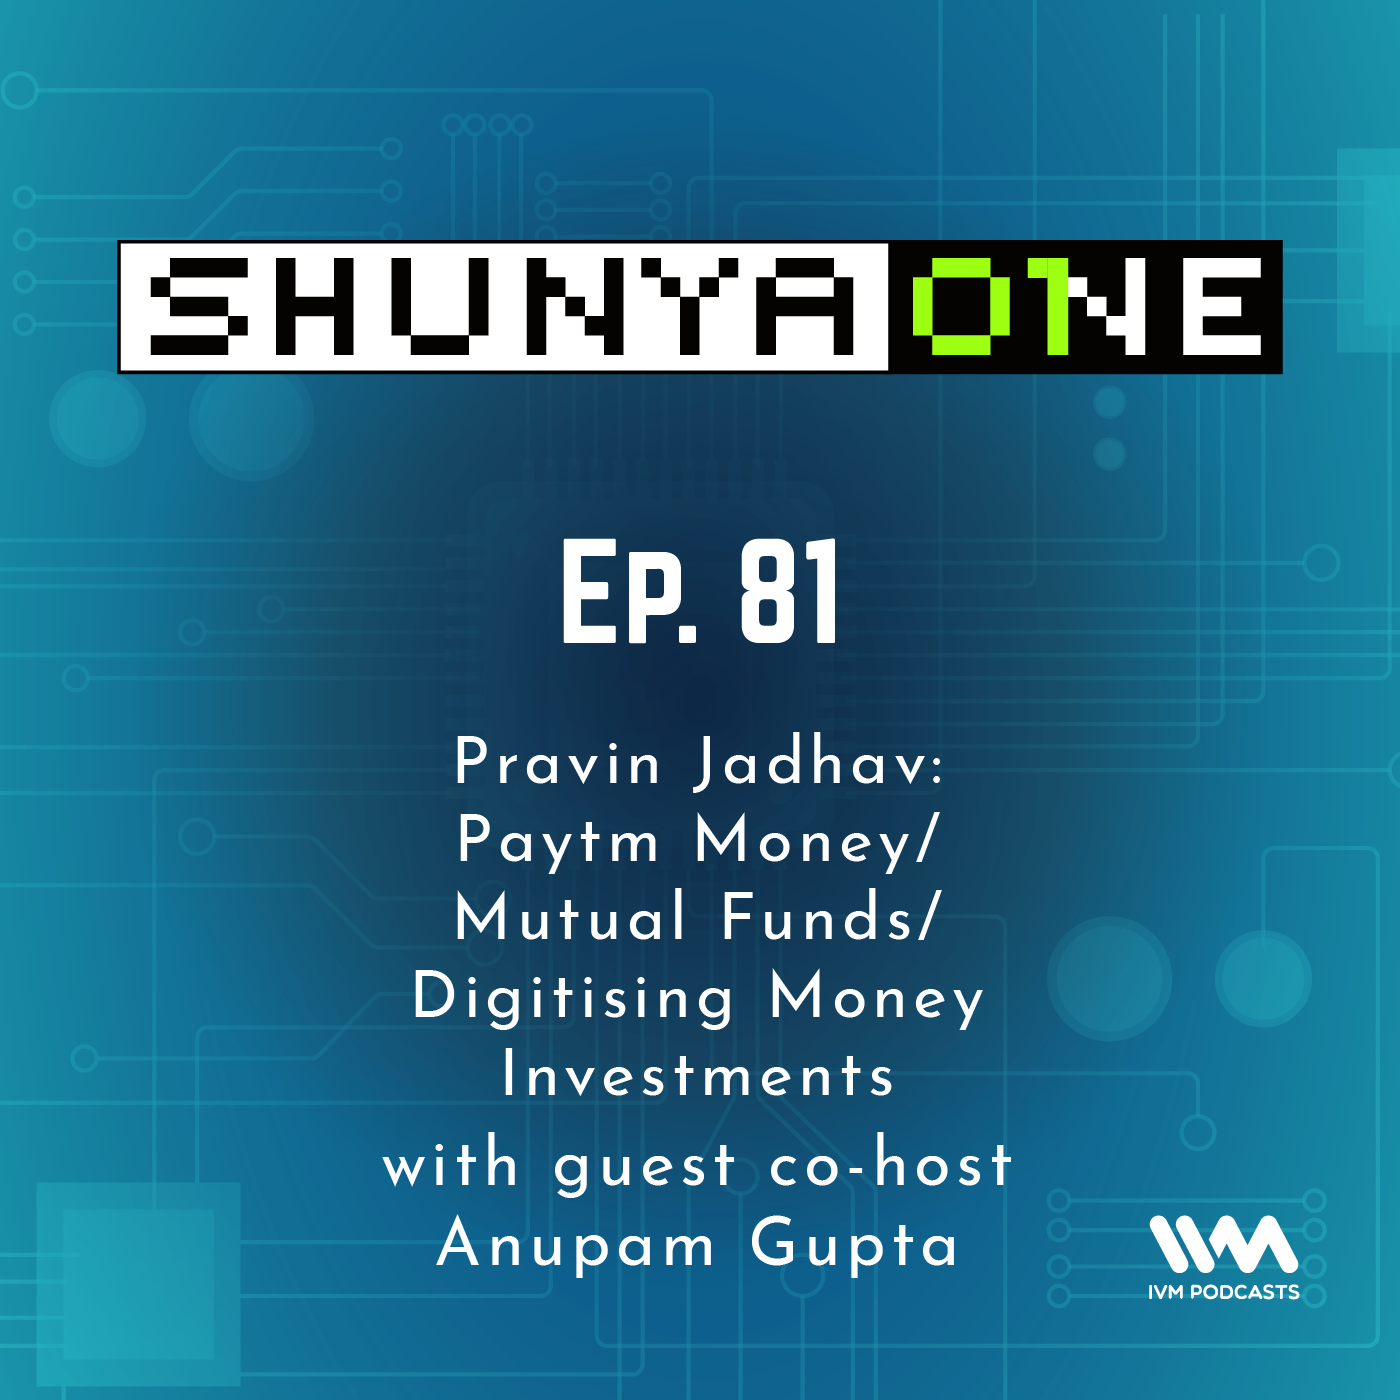 Feat. Pravin Jadhav: Paytm Money/Mutual Funds/ Digitising Money Investments with guest co-host Anupam Gupta